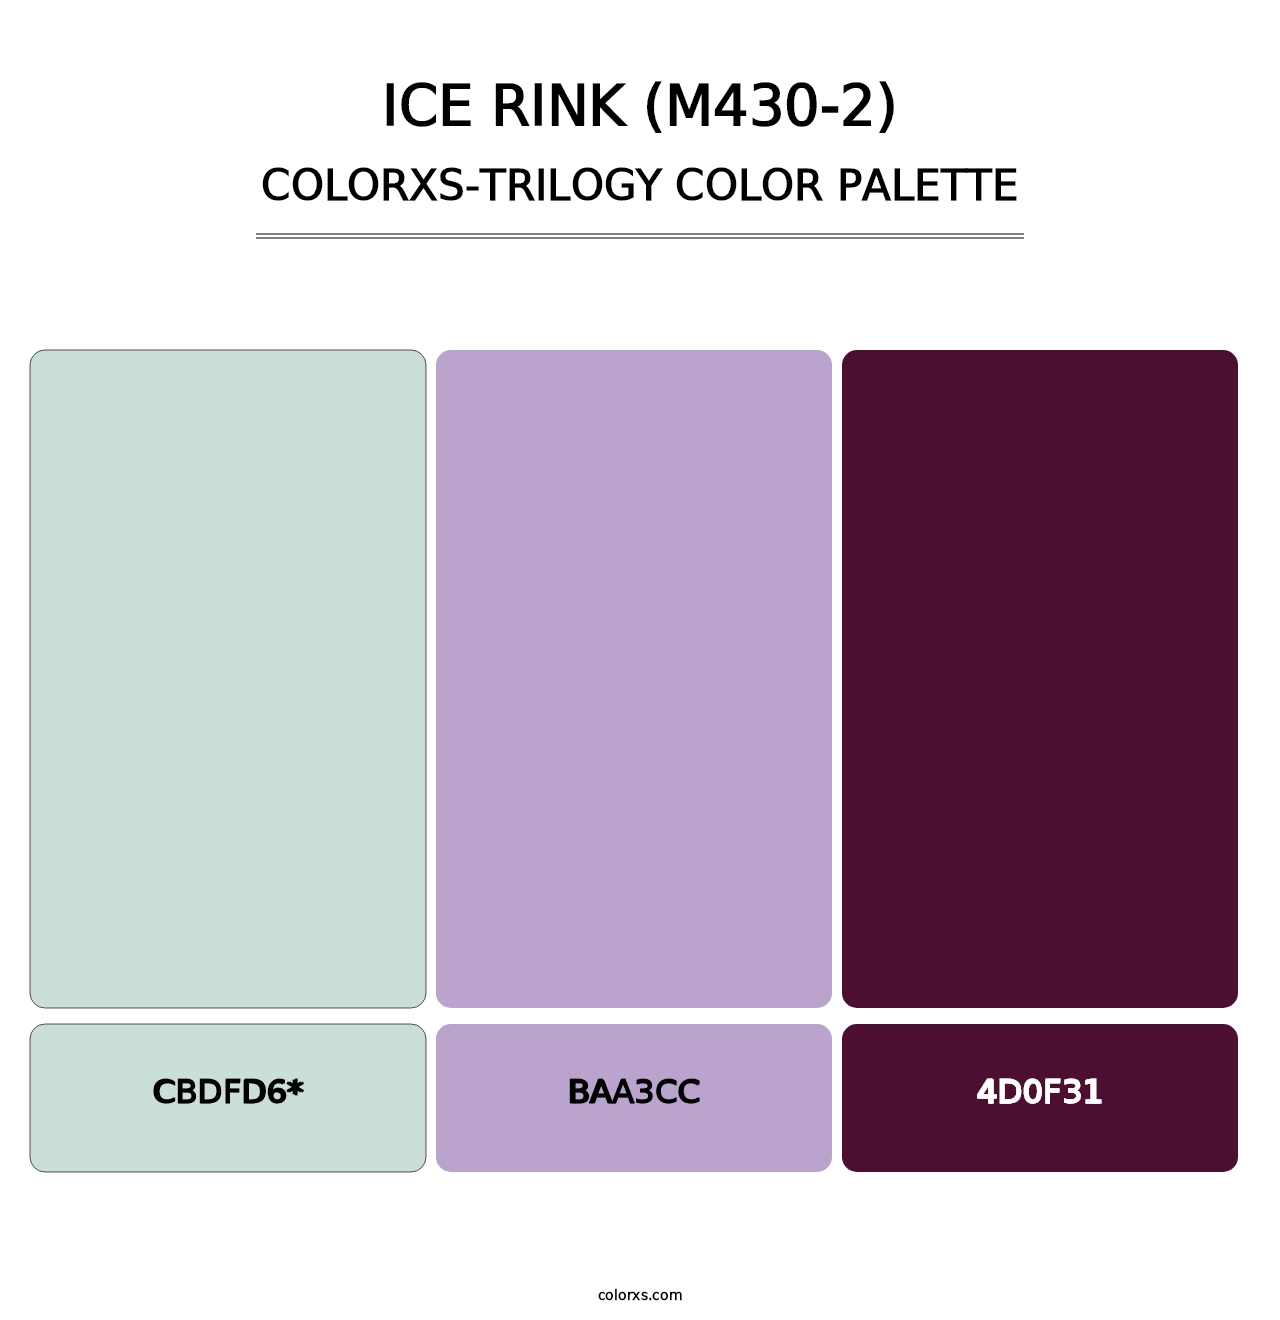 Ice Rink (M430-2) - Colorxs Trilogy Palette